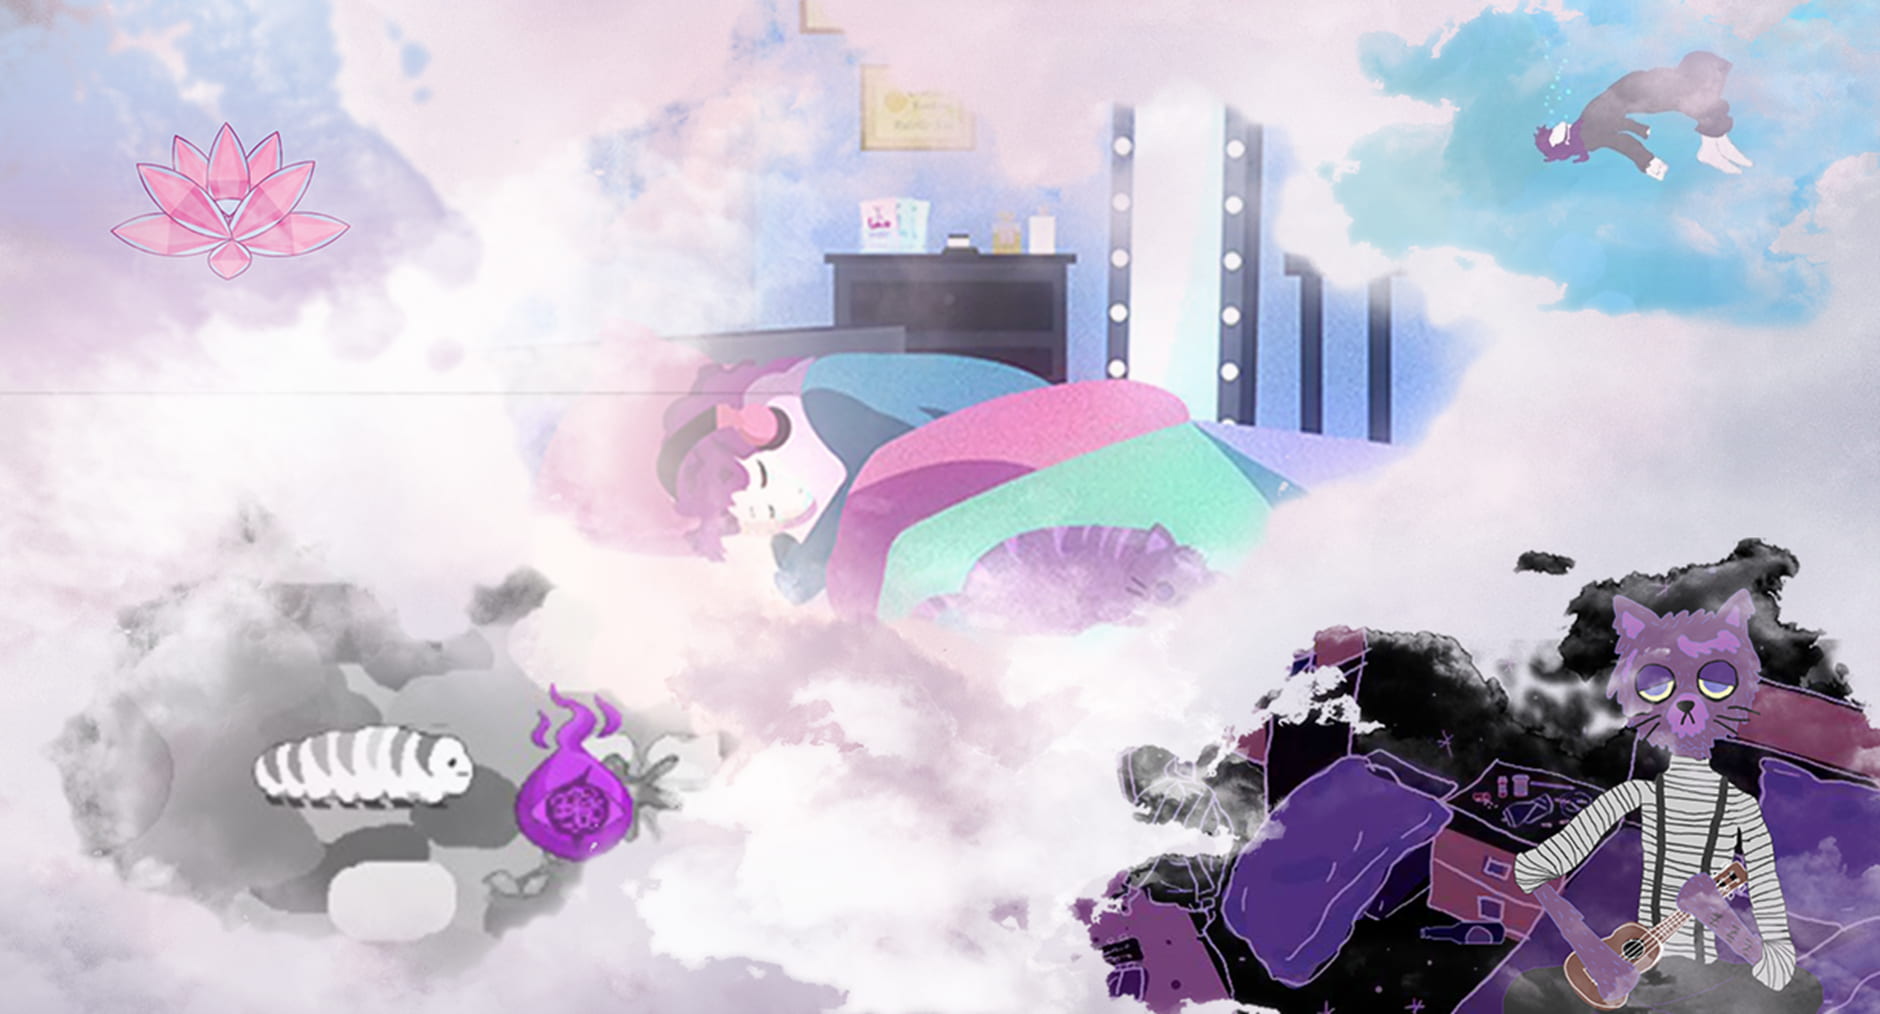 Purple-pink clouds are simulated with different scenes, including someone asleep in bed, a grab in the earth, a person falling in the sky and a cat playing guitar.